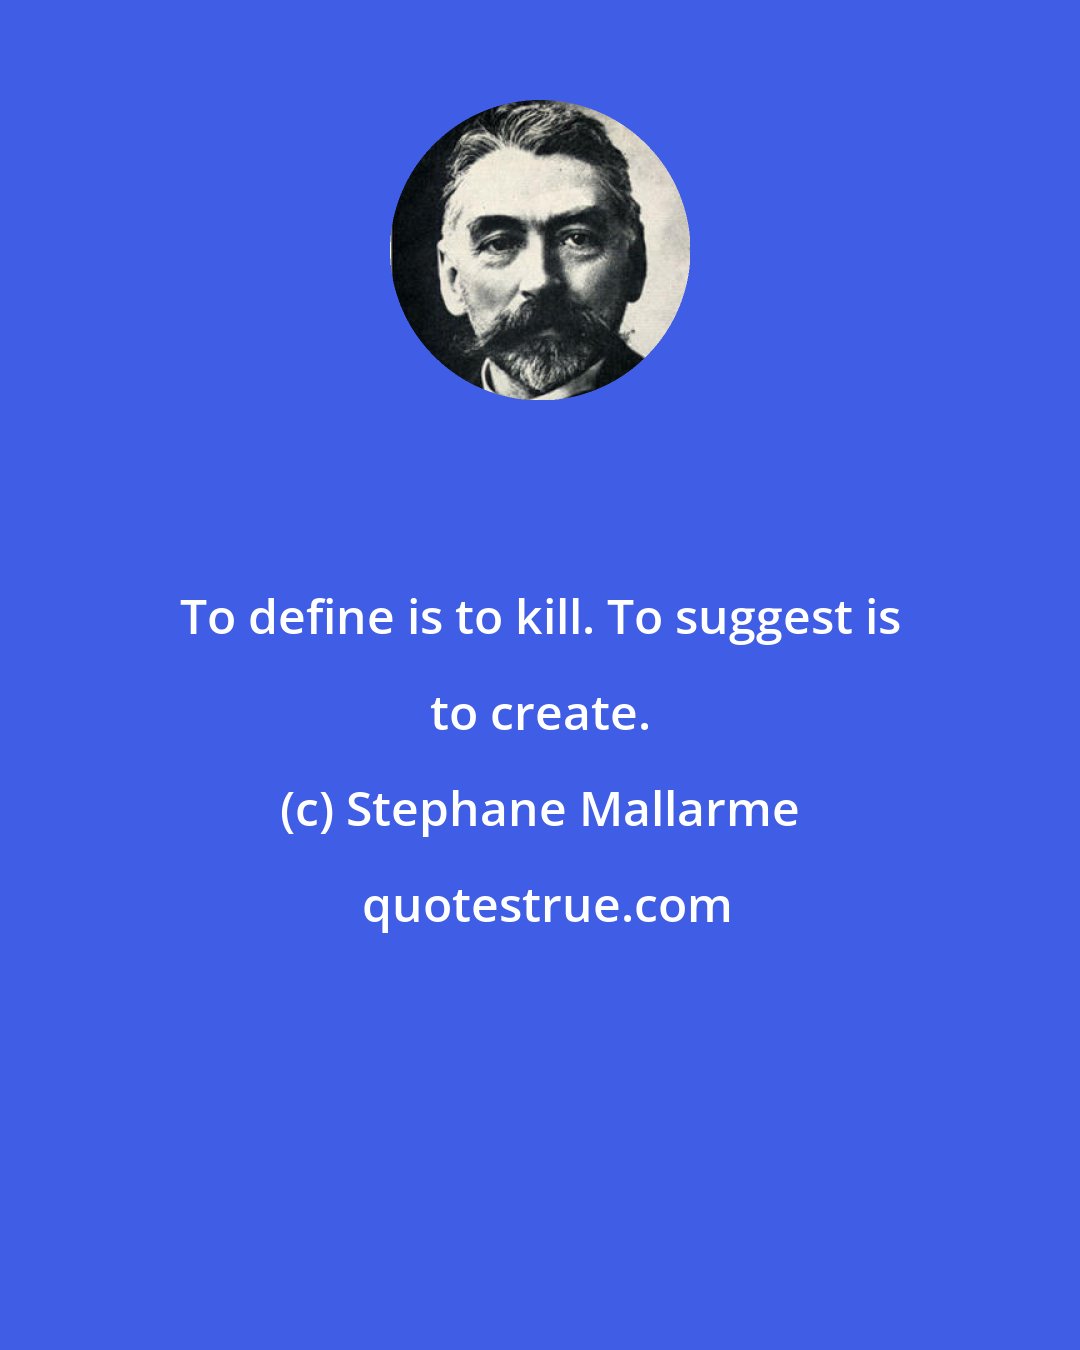 Stephane Mallarme: To define is to kill. To suggest is to create.